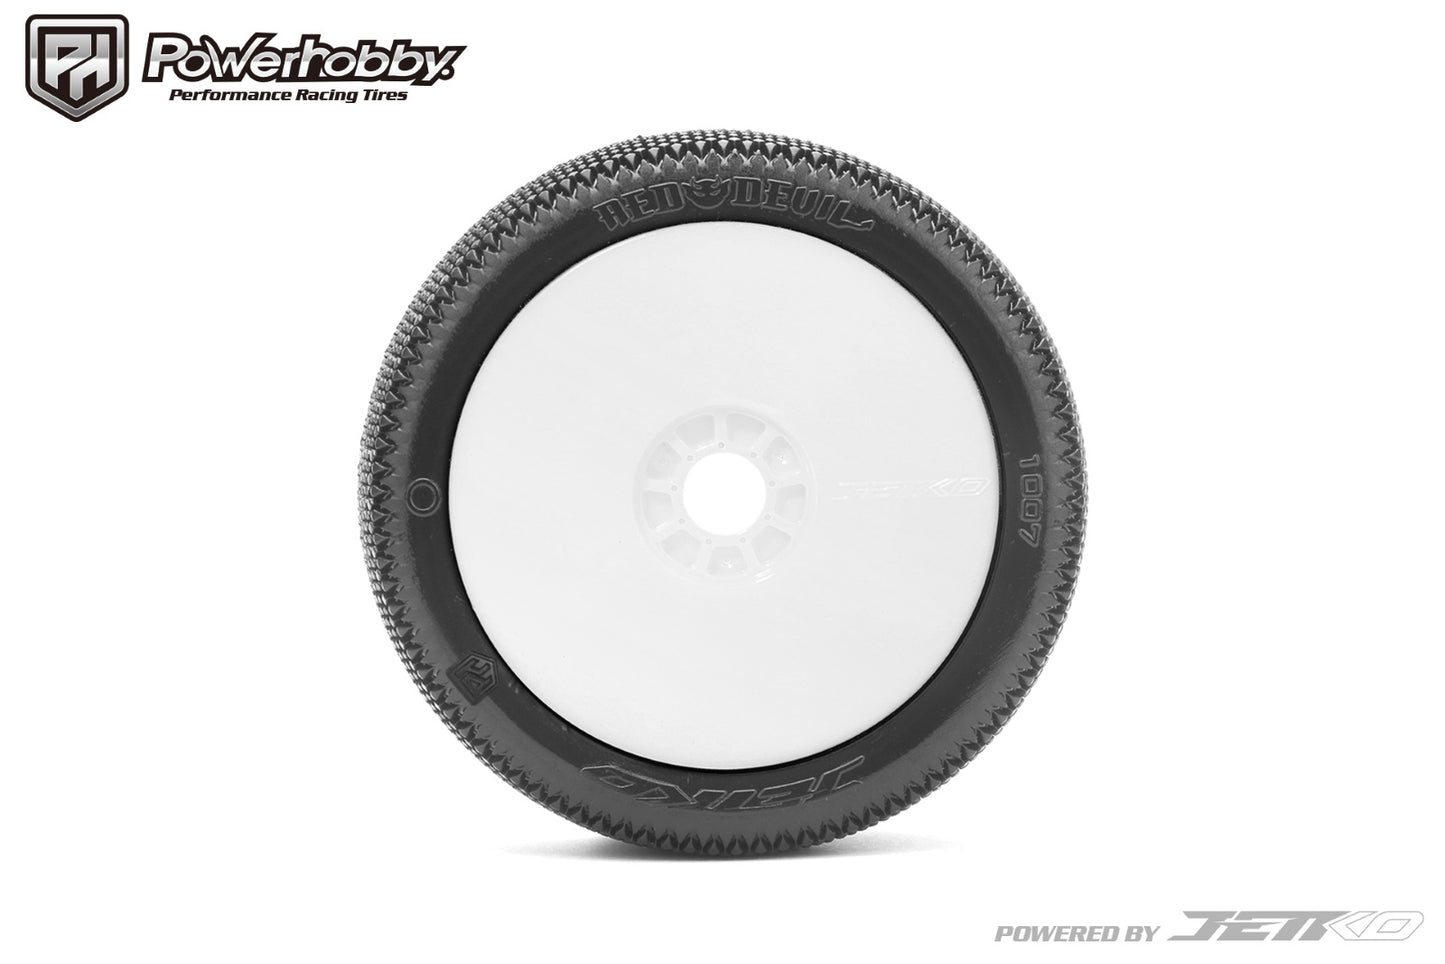 Powerhobby Red Devil 1/8 Buggy Mounted Tires White (2) Super Soft - PowerHobby